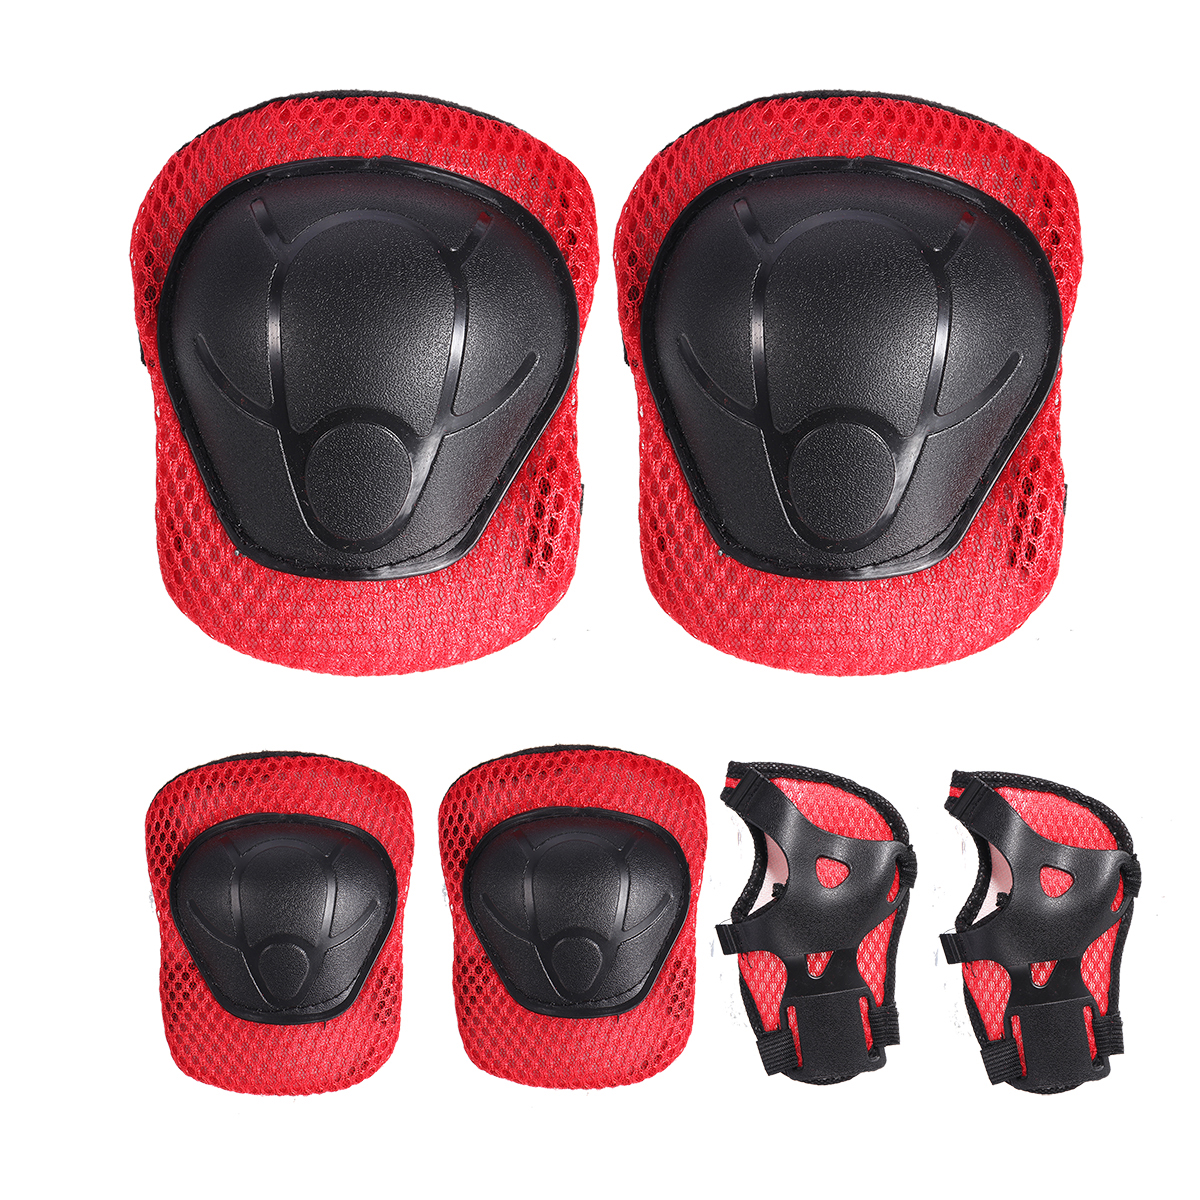 6PcsSet-Children-Skating-Bike-Protective-Gear-Sets-Knee-Elbow-Pads-Bicycle-Skateboard-Ice-Skating-Ro-1703317-8